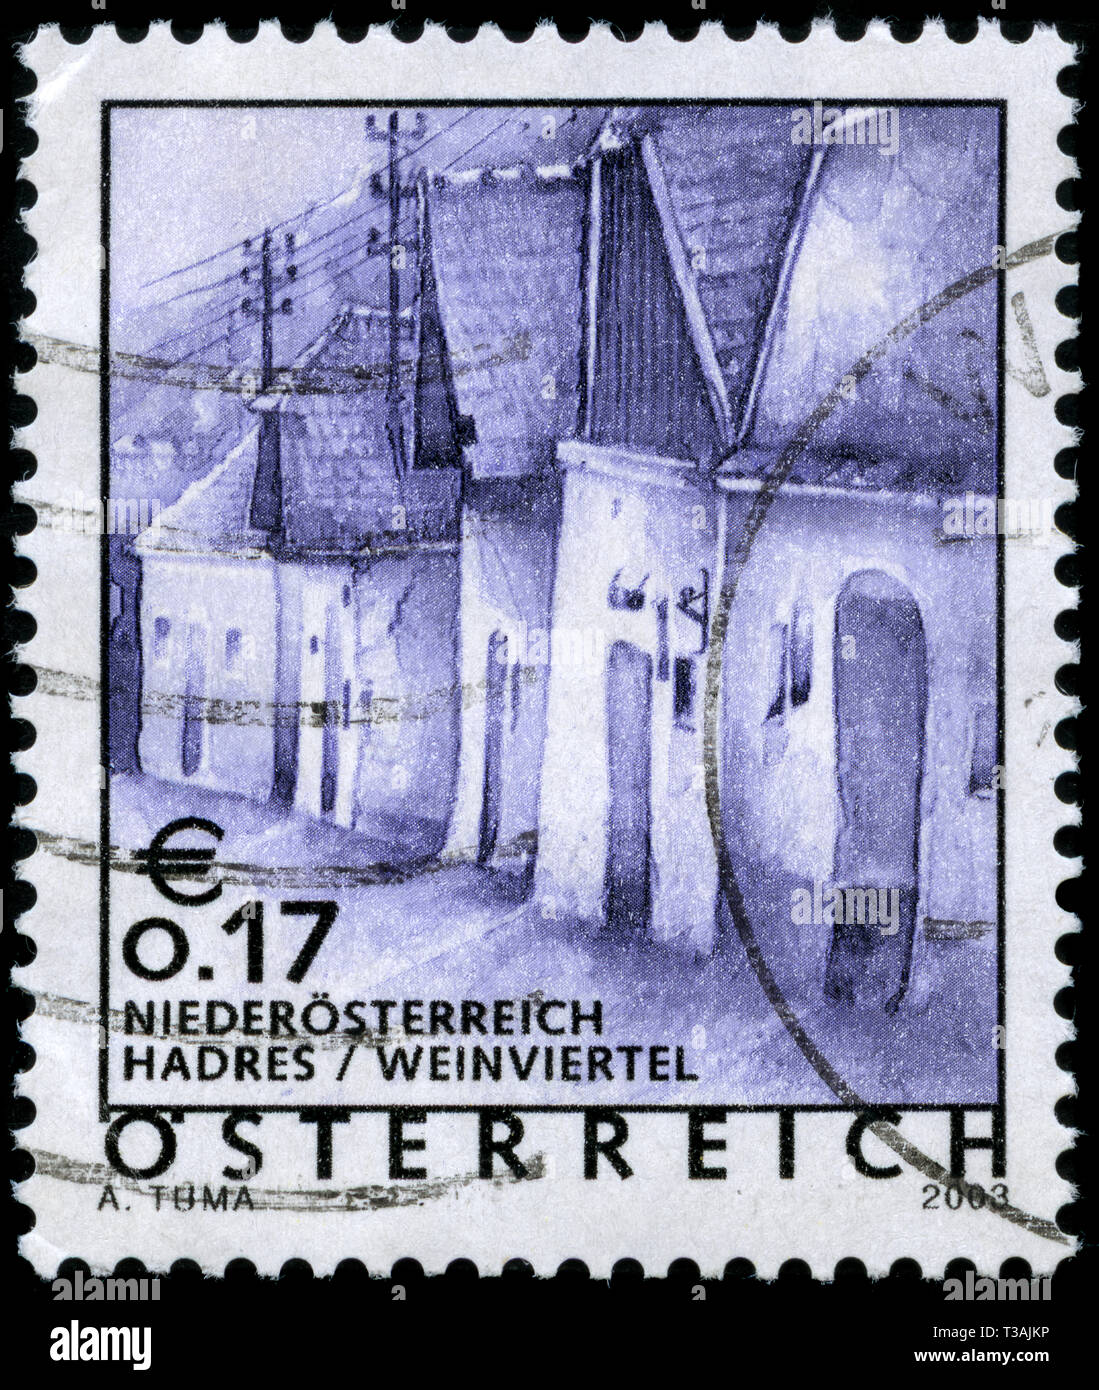 Postage stamp from Austria in the Holiday country Austria series issued in 2003 Stock Photo